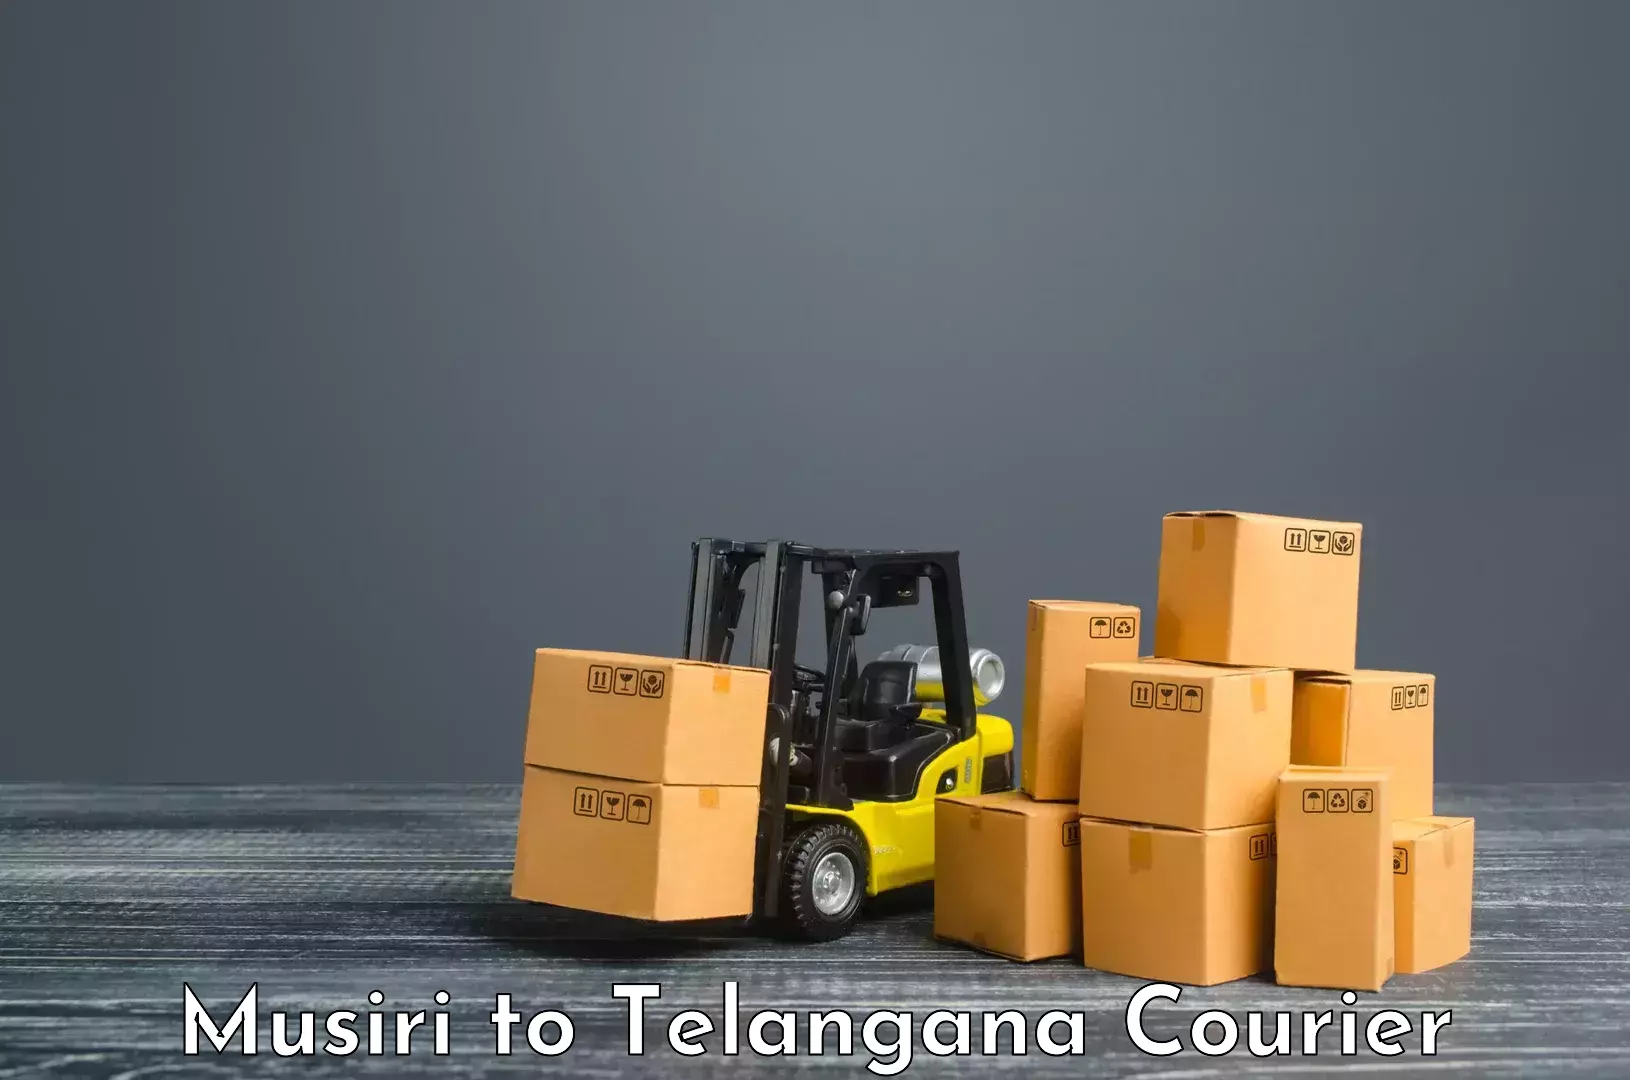 Efficient courier operations Musiri to Tandur